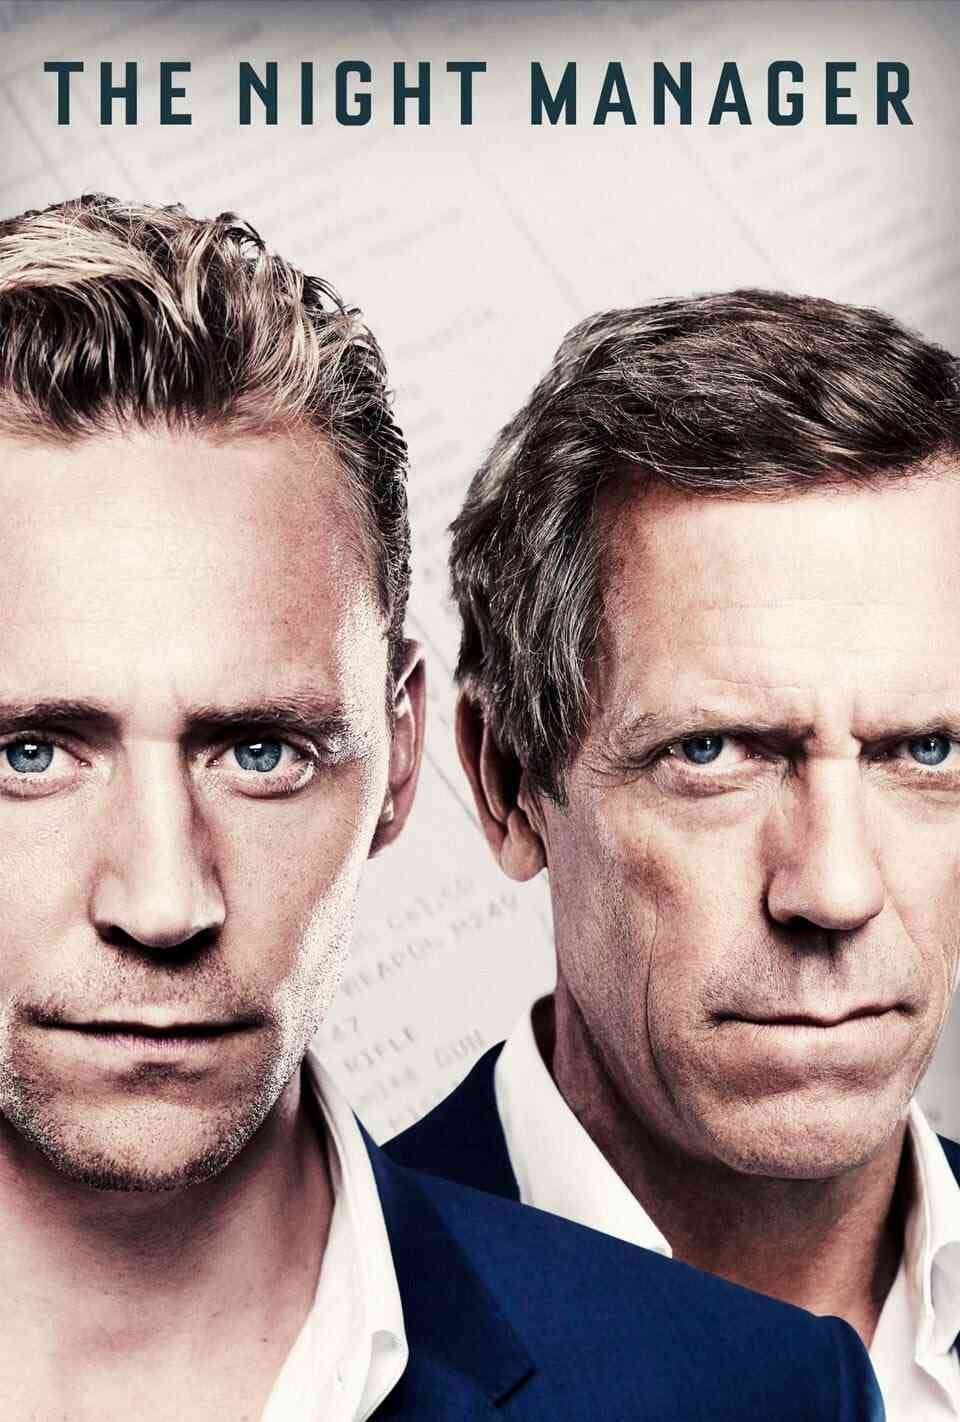 Read The Night Manager screenplay (poster)